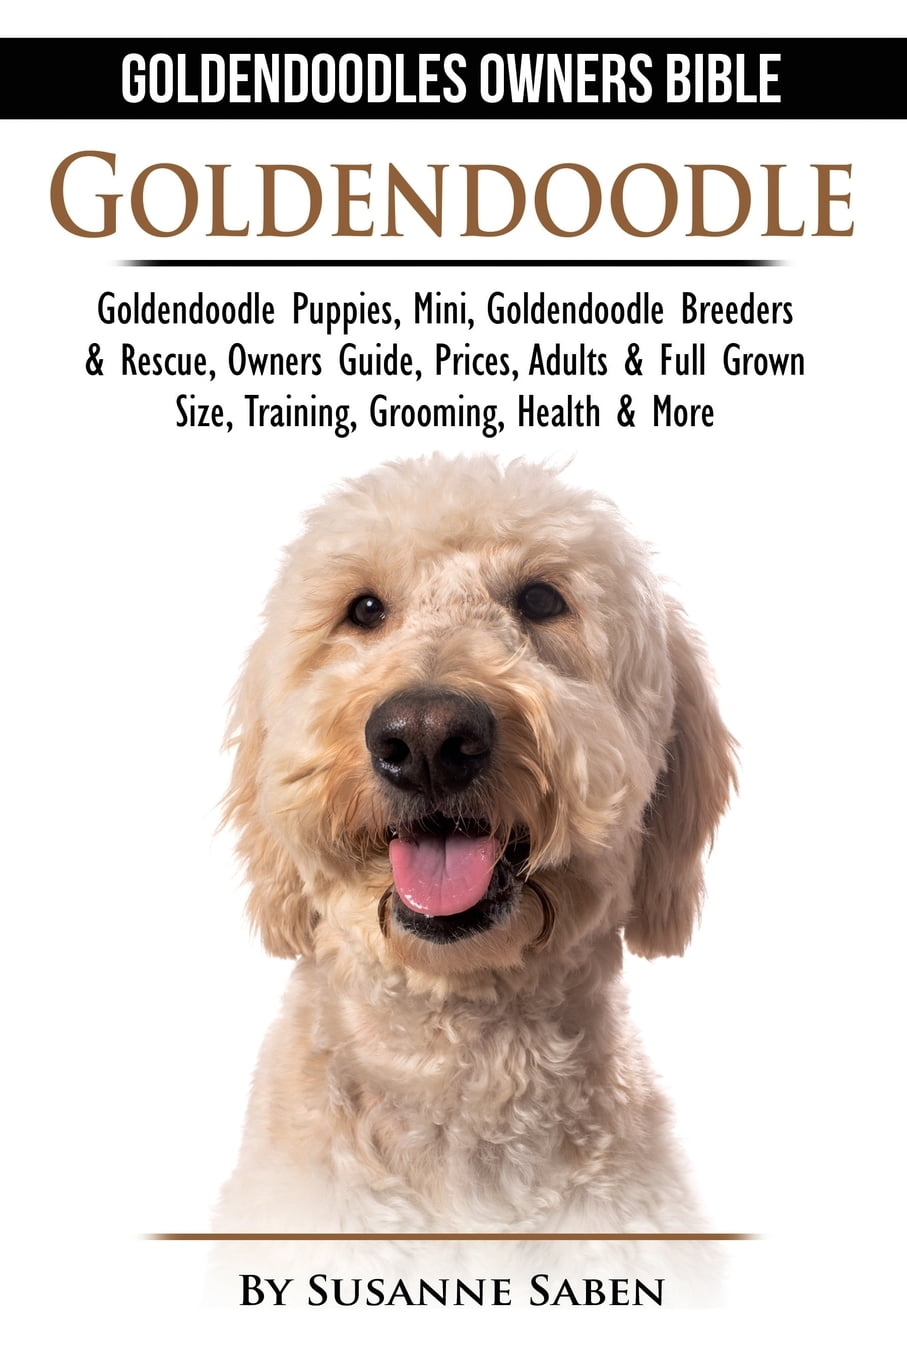 Goldendoodle: Goldendoodle Owners Bible: Goldendoodle Puppies, Mini